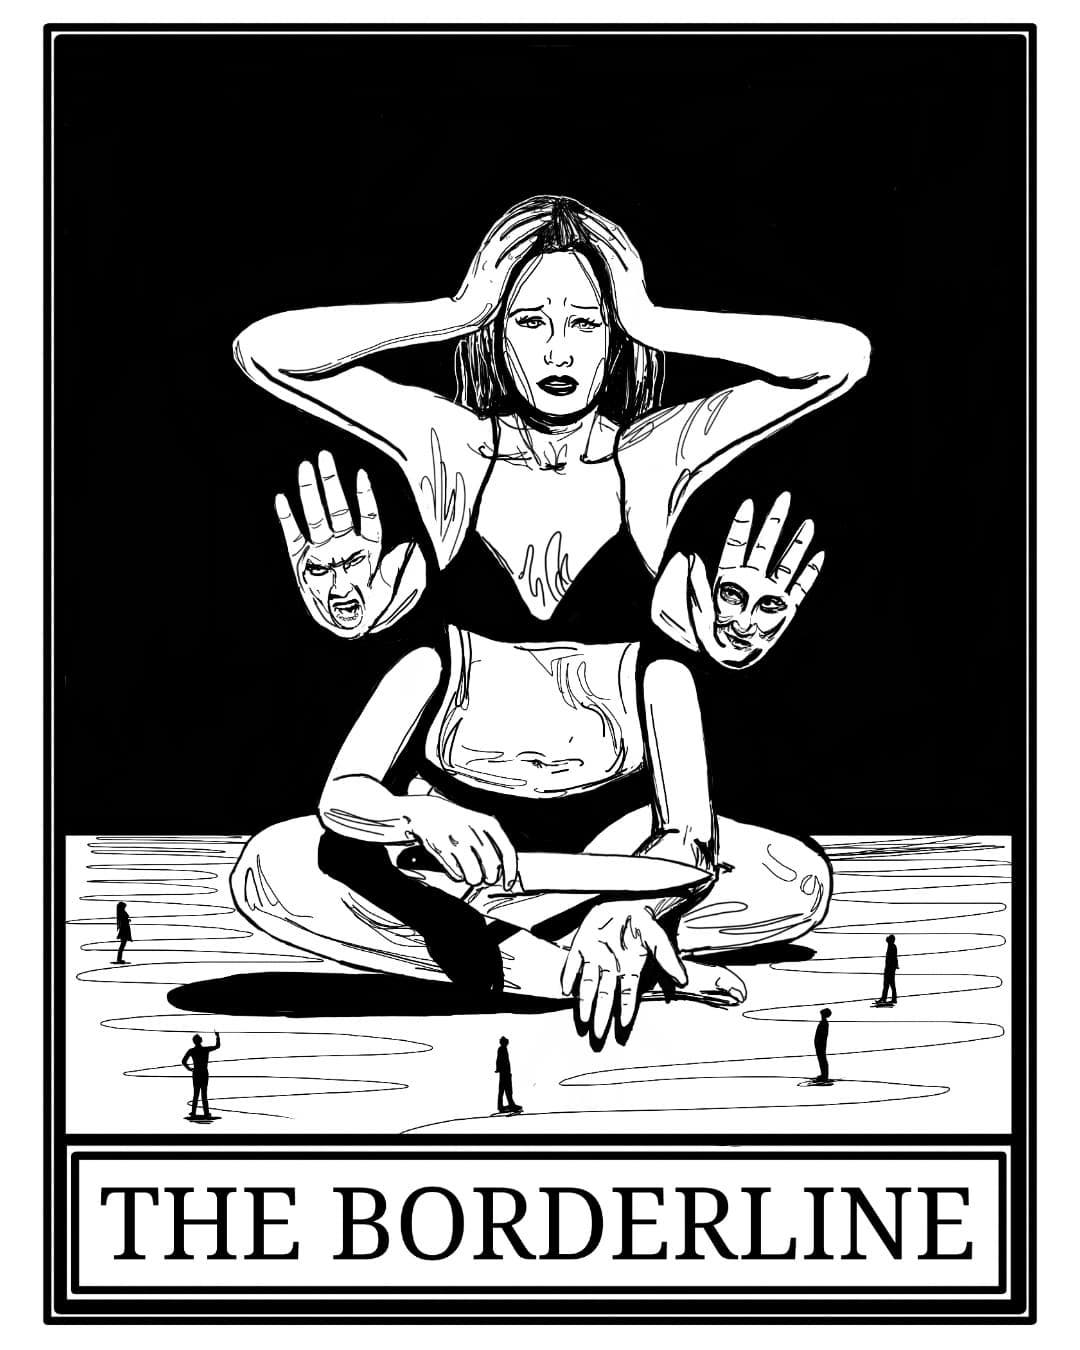 "The Borderline" 

This is an artistic expression on borderline personality disorder.

#bpd #borderlinepersonalitydisord